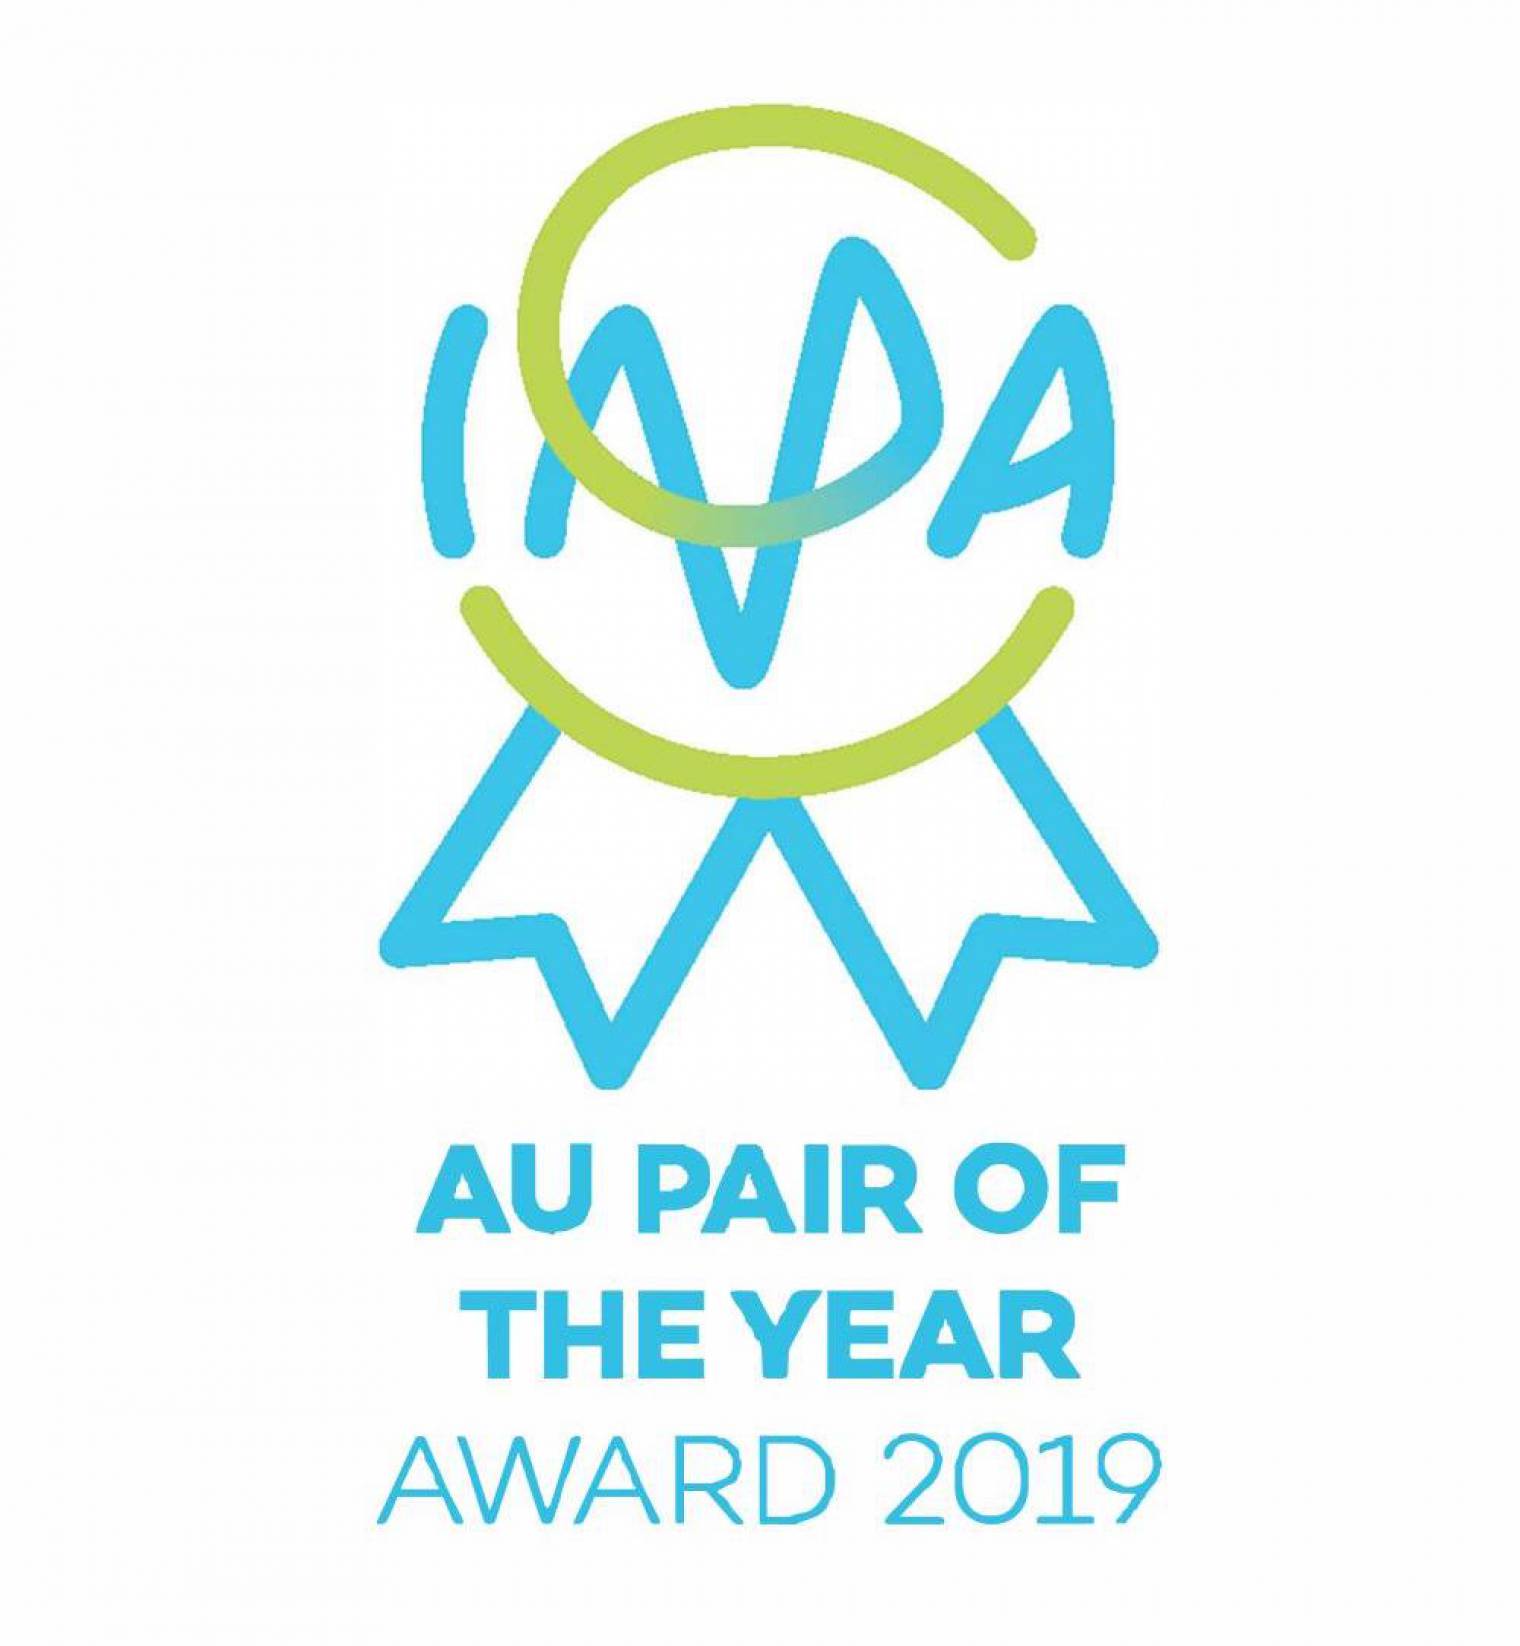 Meet our Finalists – Au Pair of the Year Award 2019